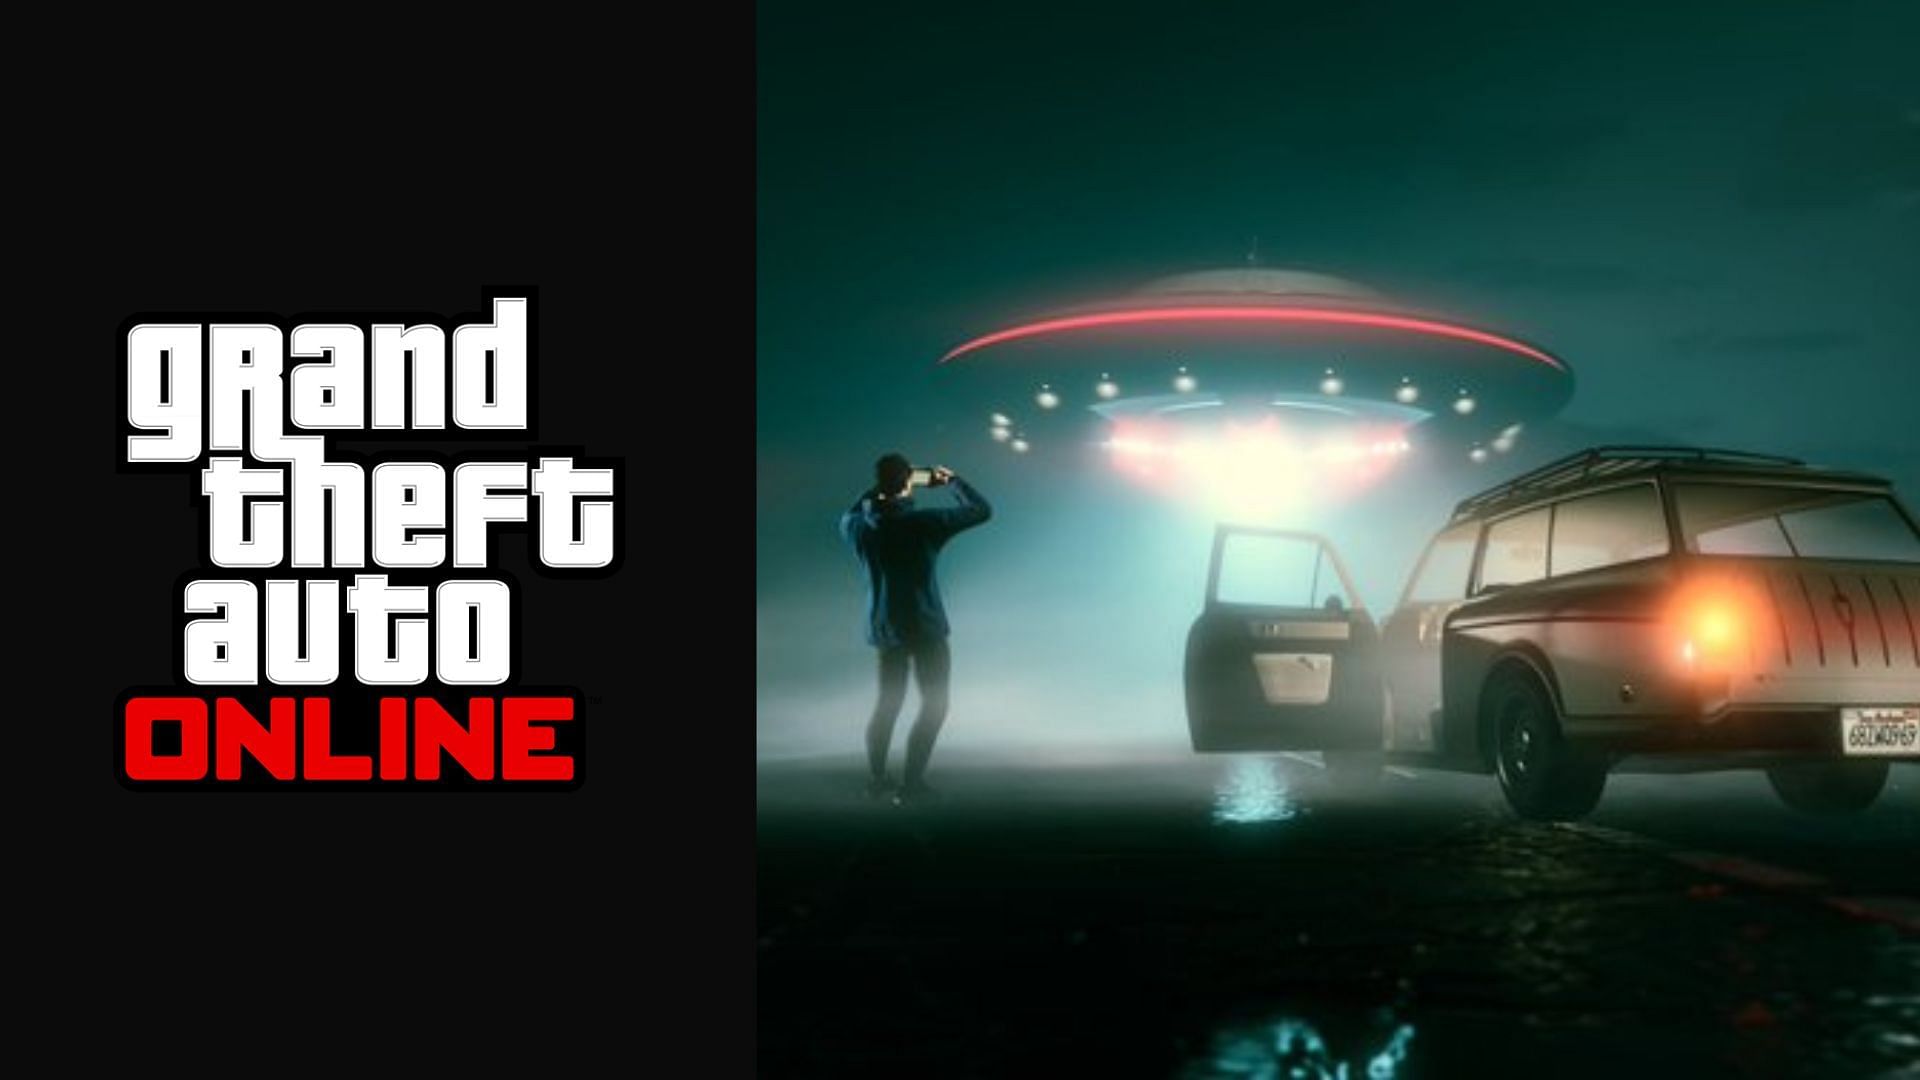 A brief about UFO location for October 15, 2022 in GTA Online during the UFO event (Image via Sportskeeda)